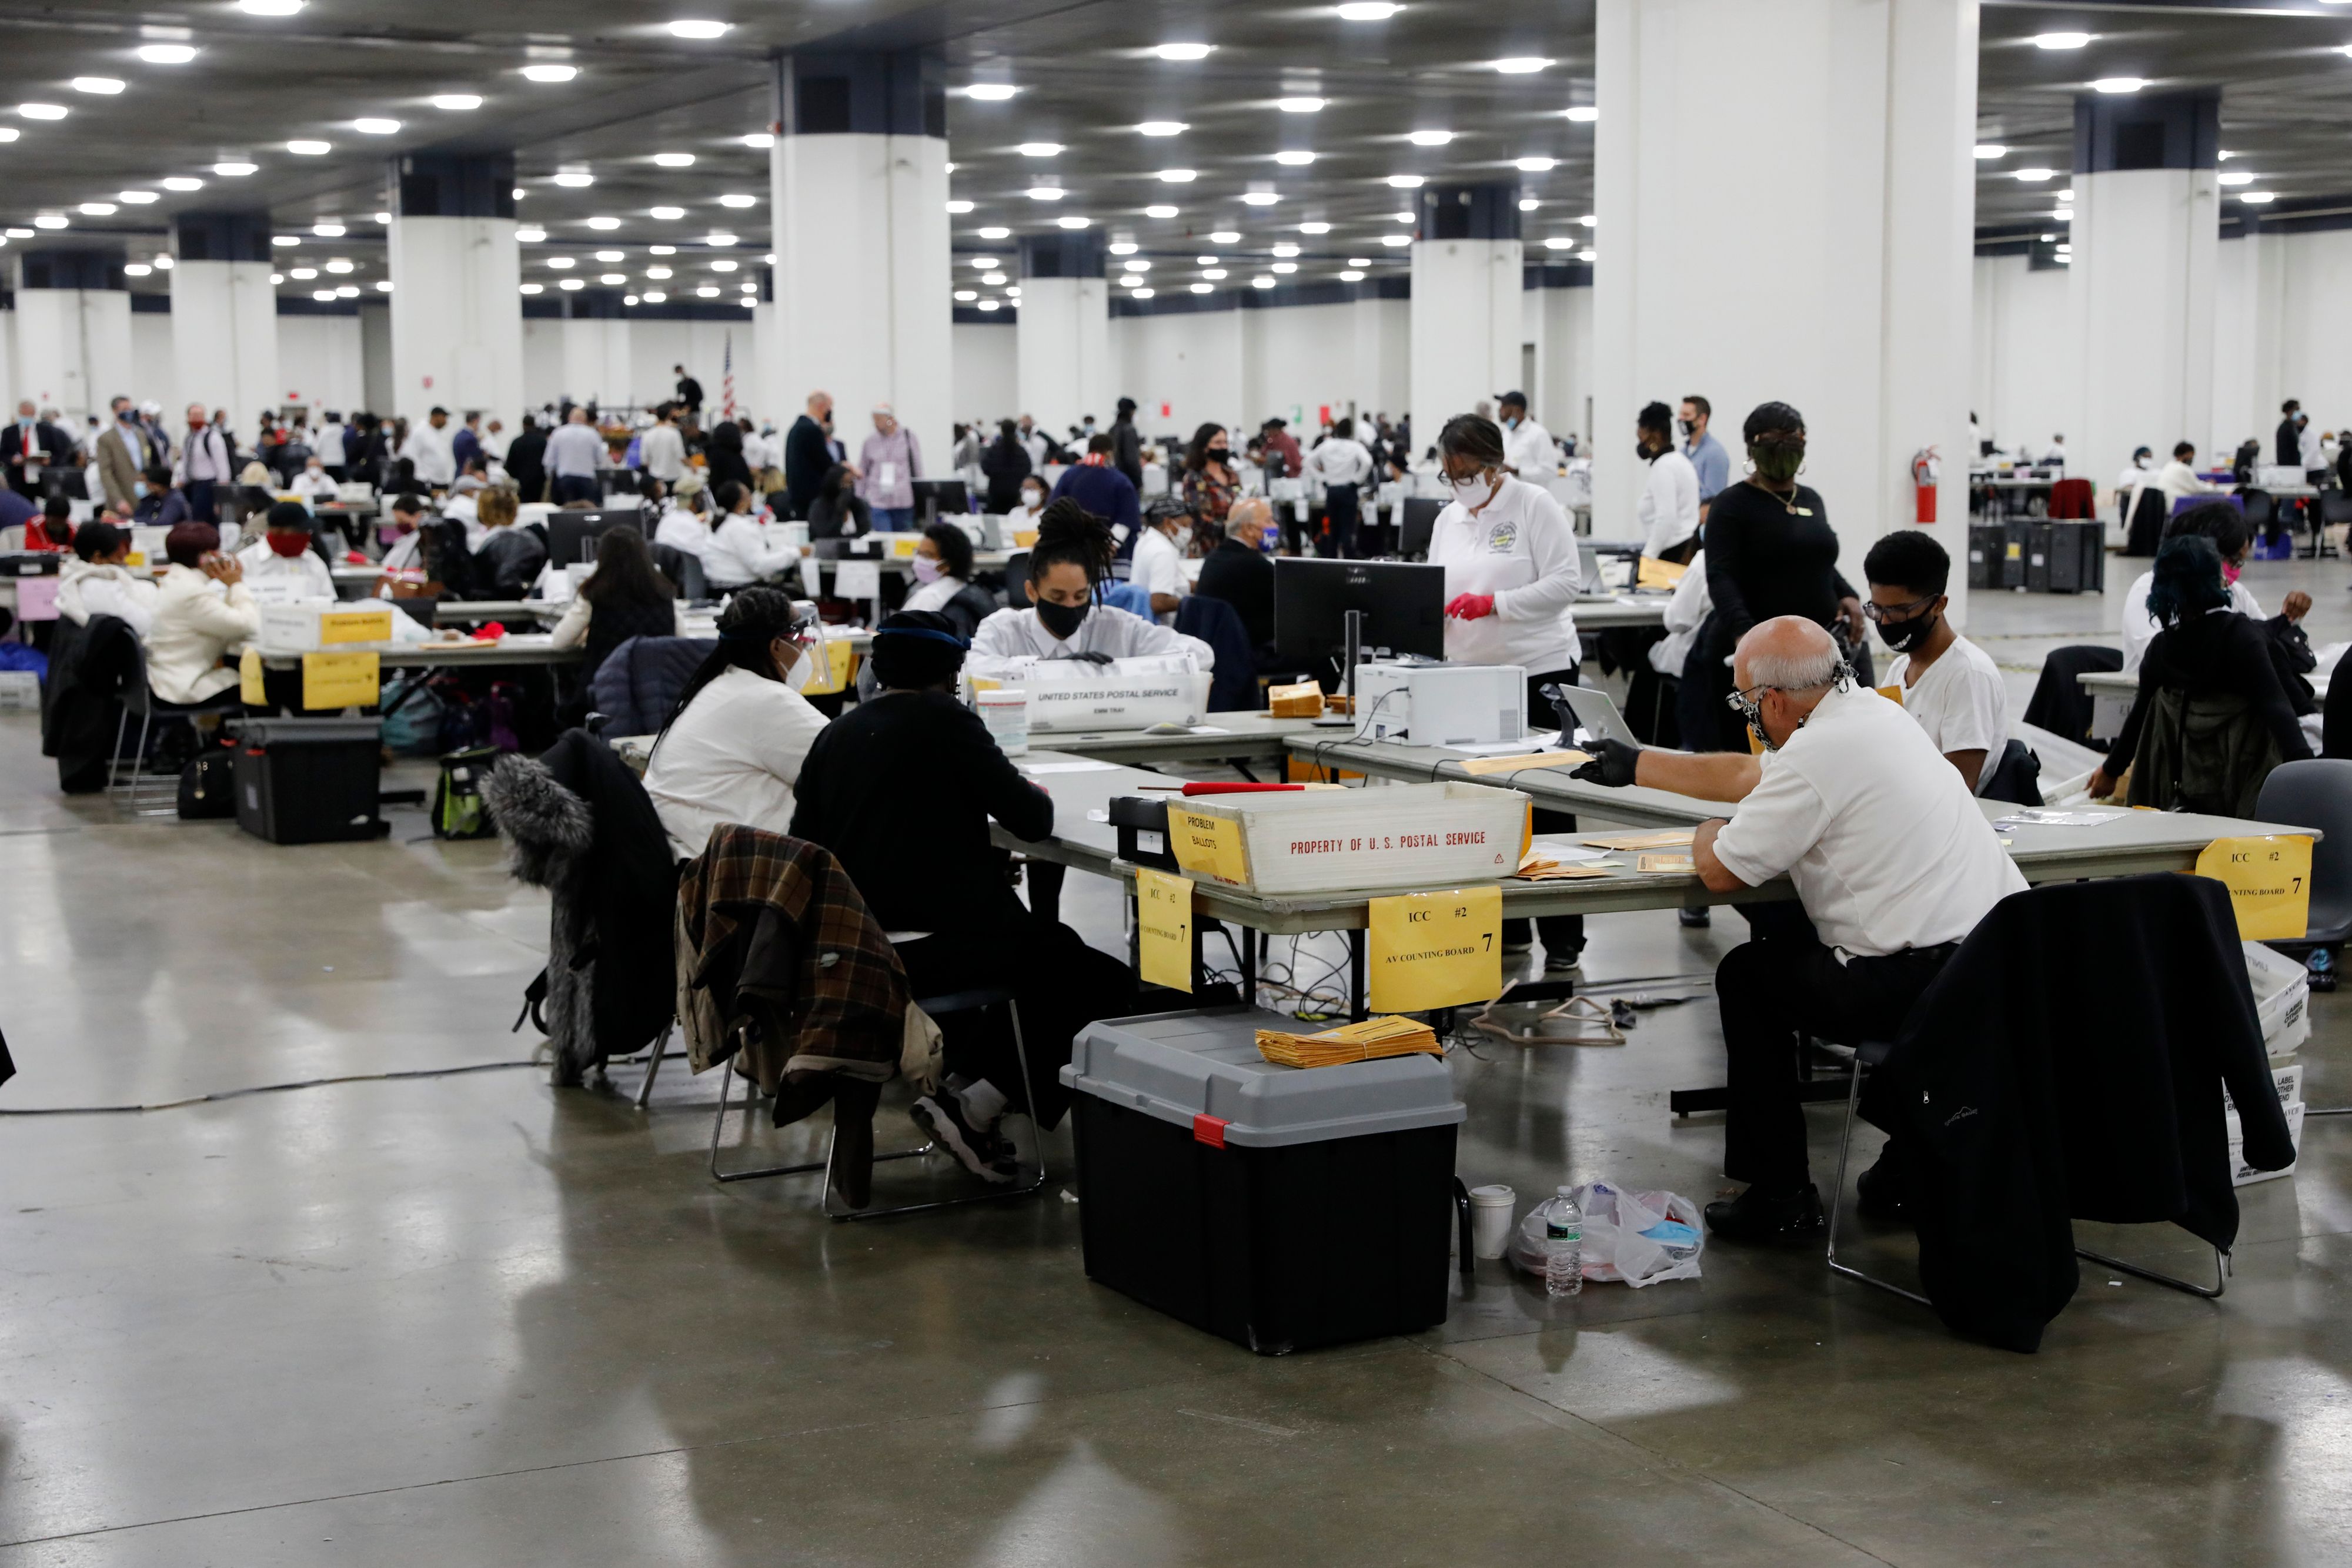 Detroit election workers work on counting absentee ballots at the TCF Center in Detroit, Michigan, on November 4.